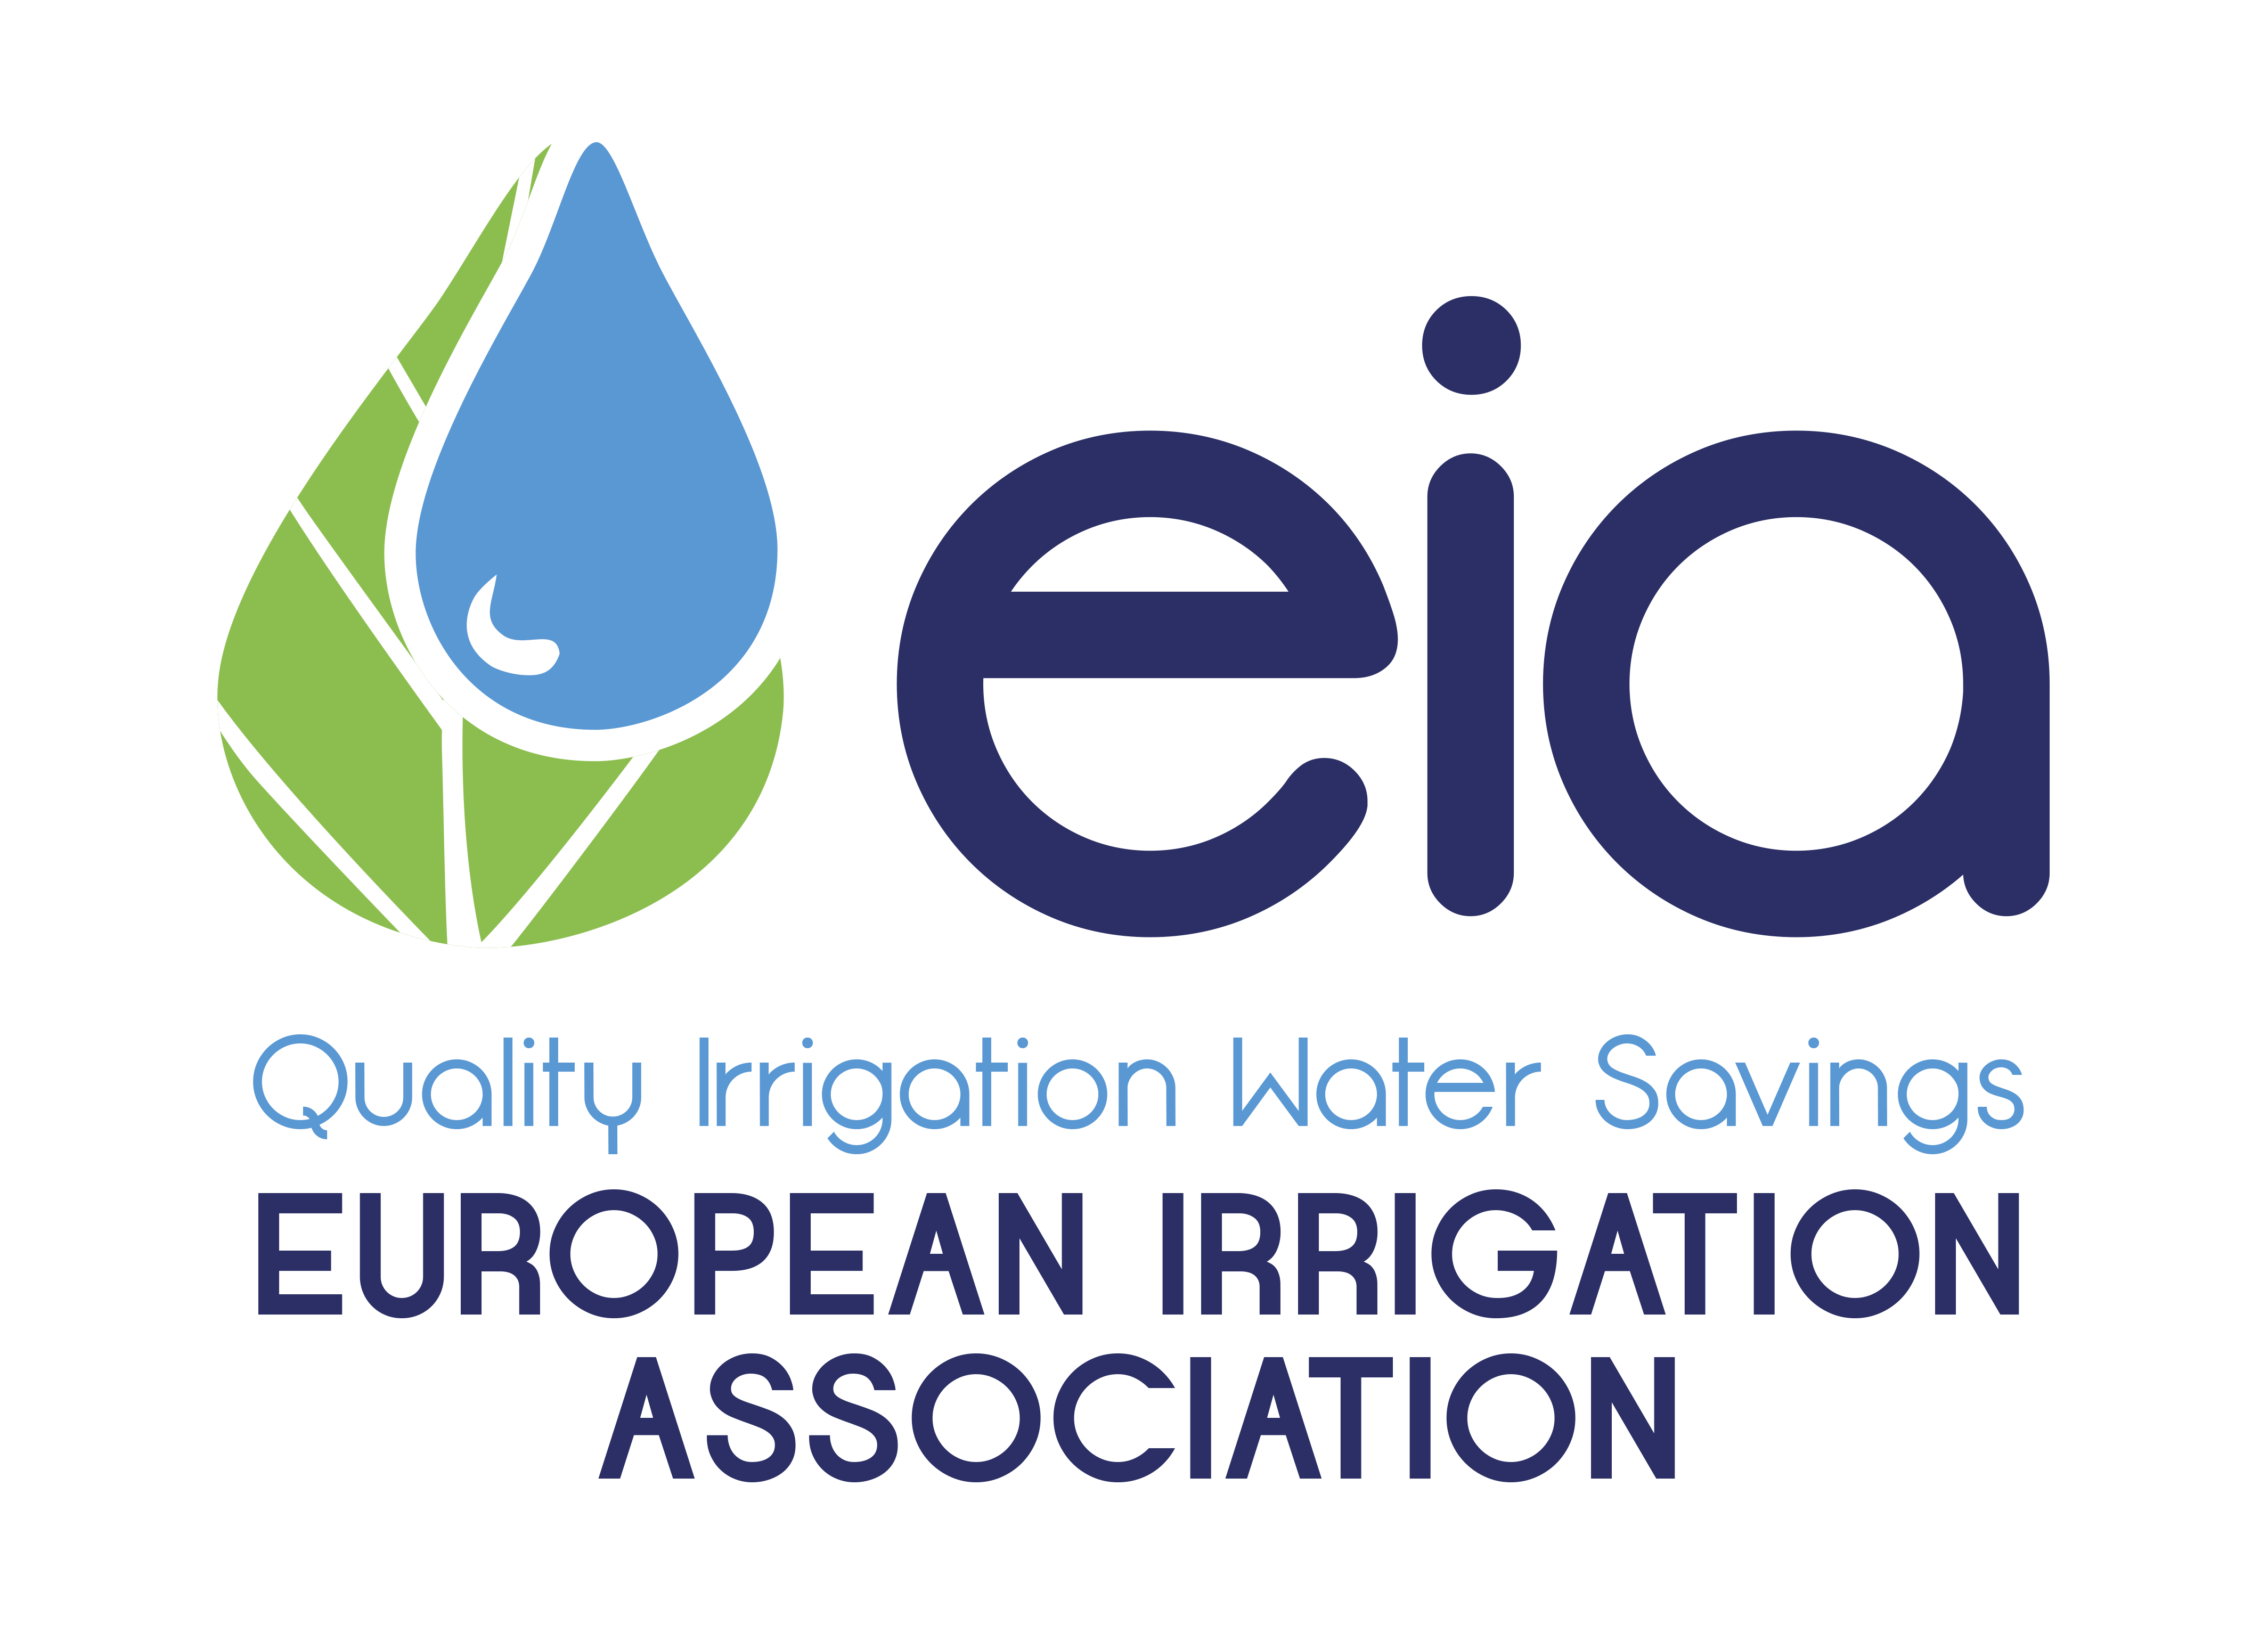 The EIA held a Spring Irrigation Forum on March 11, 2022